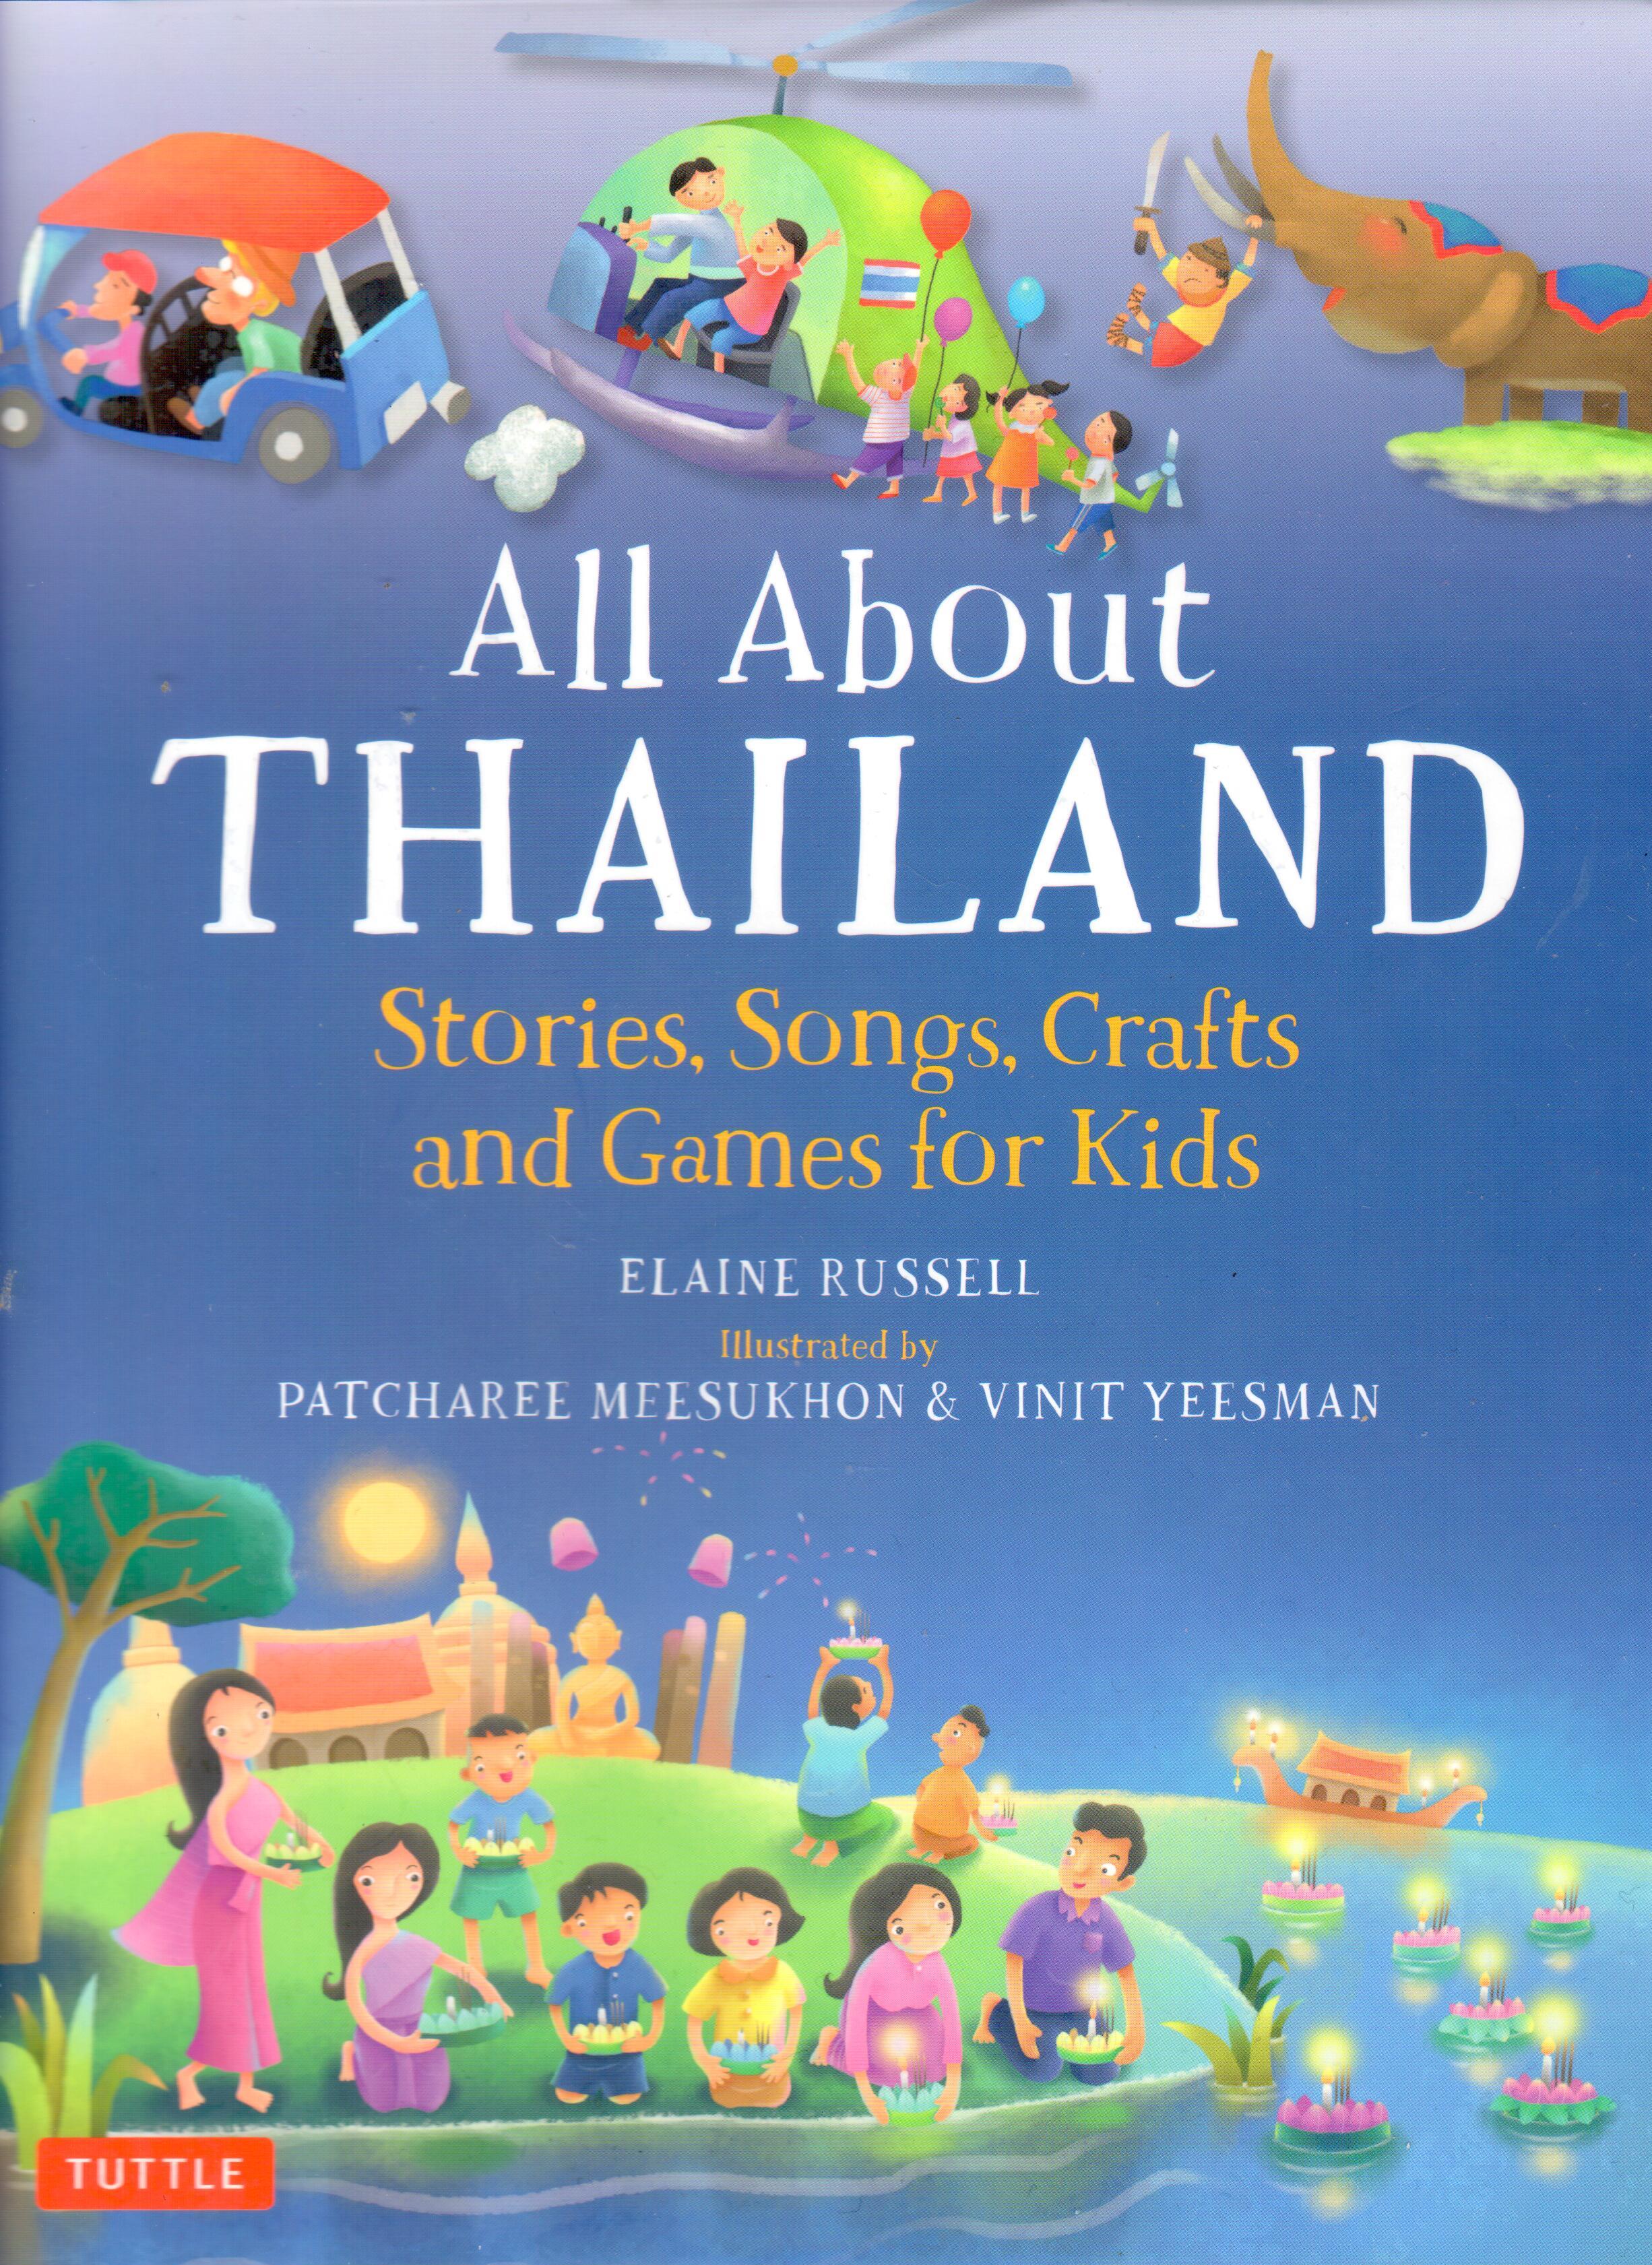 All About Thailand Stories, Songs, Crafts and Games for Kids